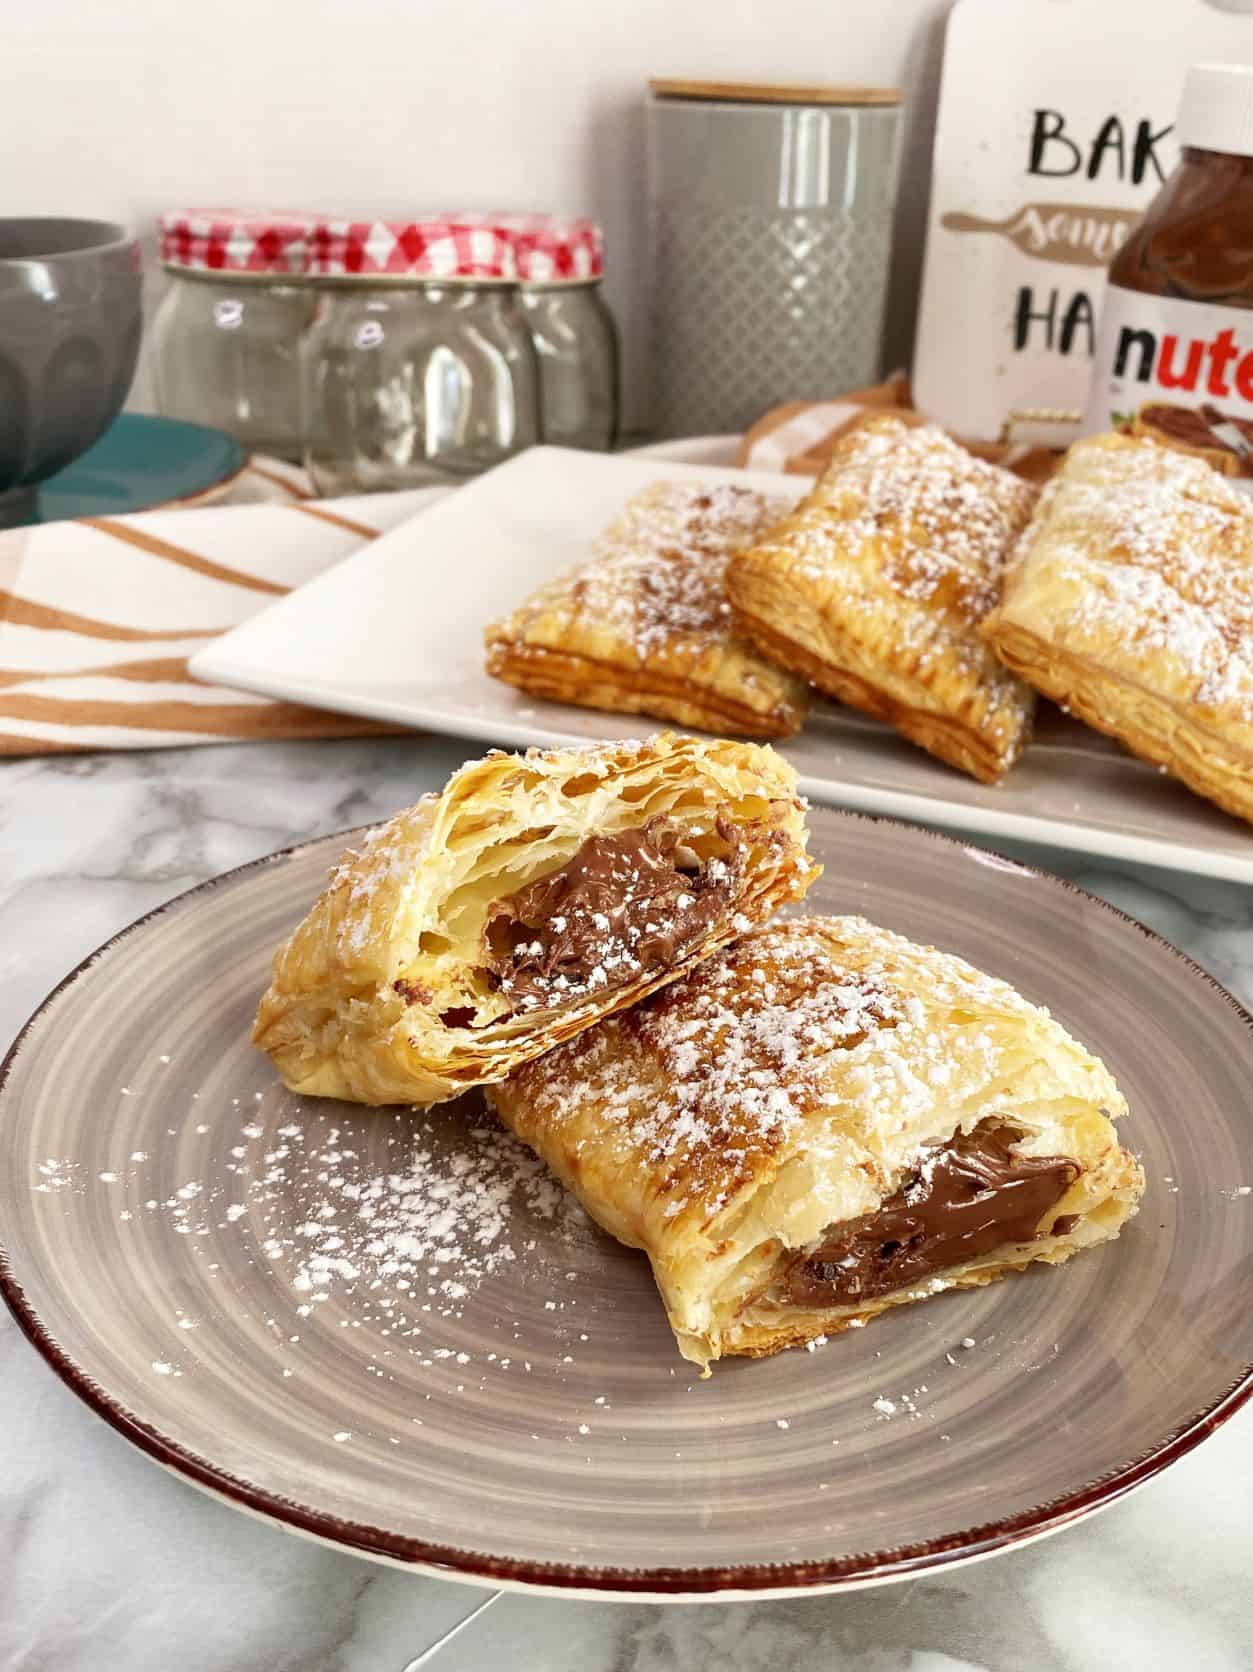 Nutella Puff pastry turnovers in a grey plate infront of tray of turnovers